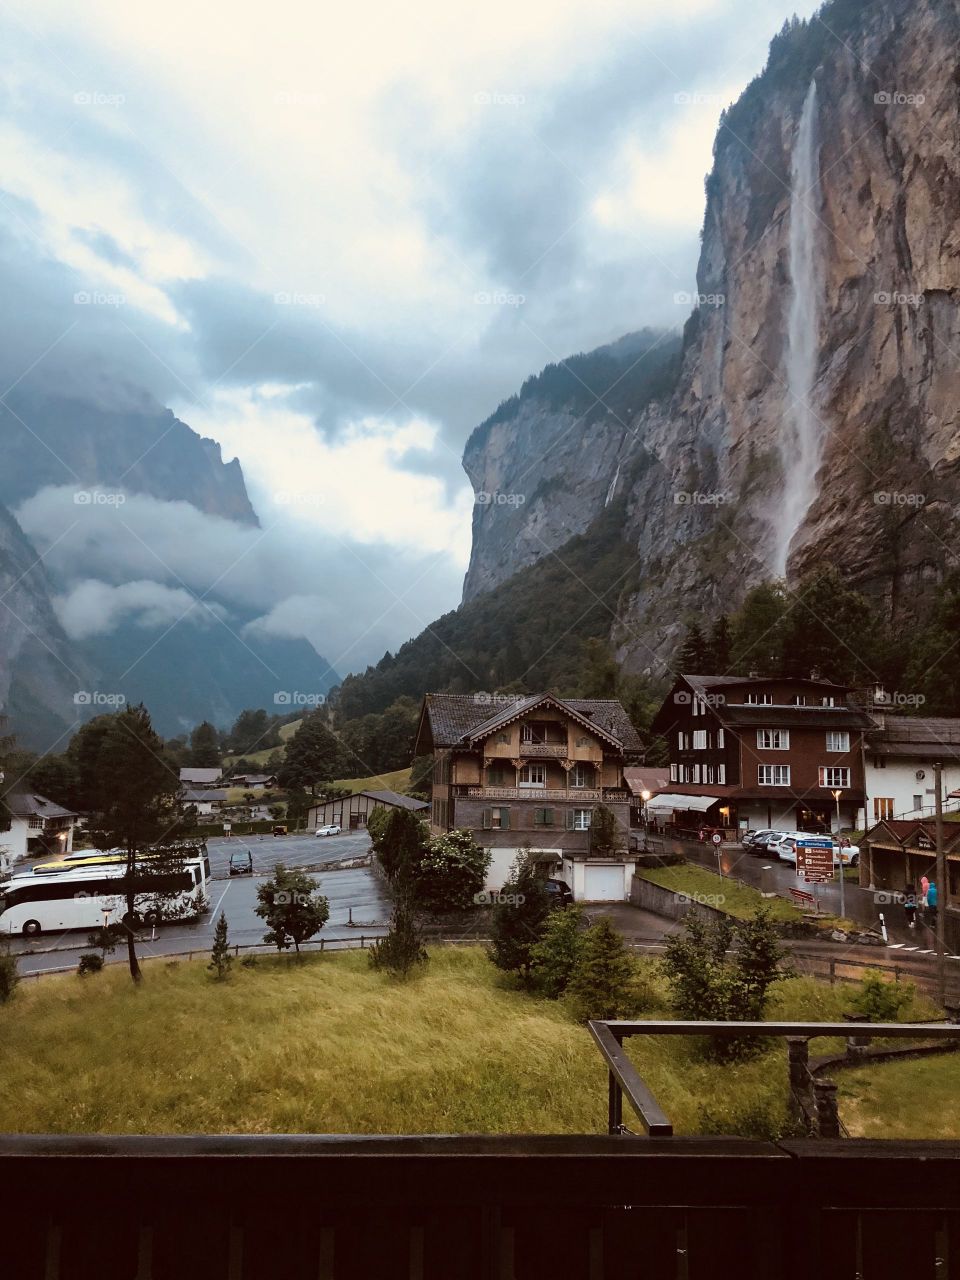 Dark Lauterbrunnen with a view of a beautiful and obscure waterfall off a mountain. Huge houses and great tourist view.